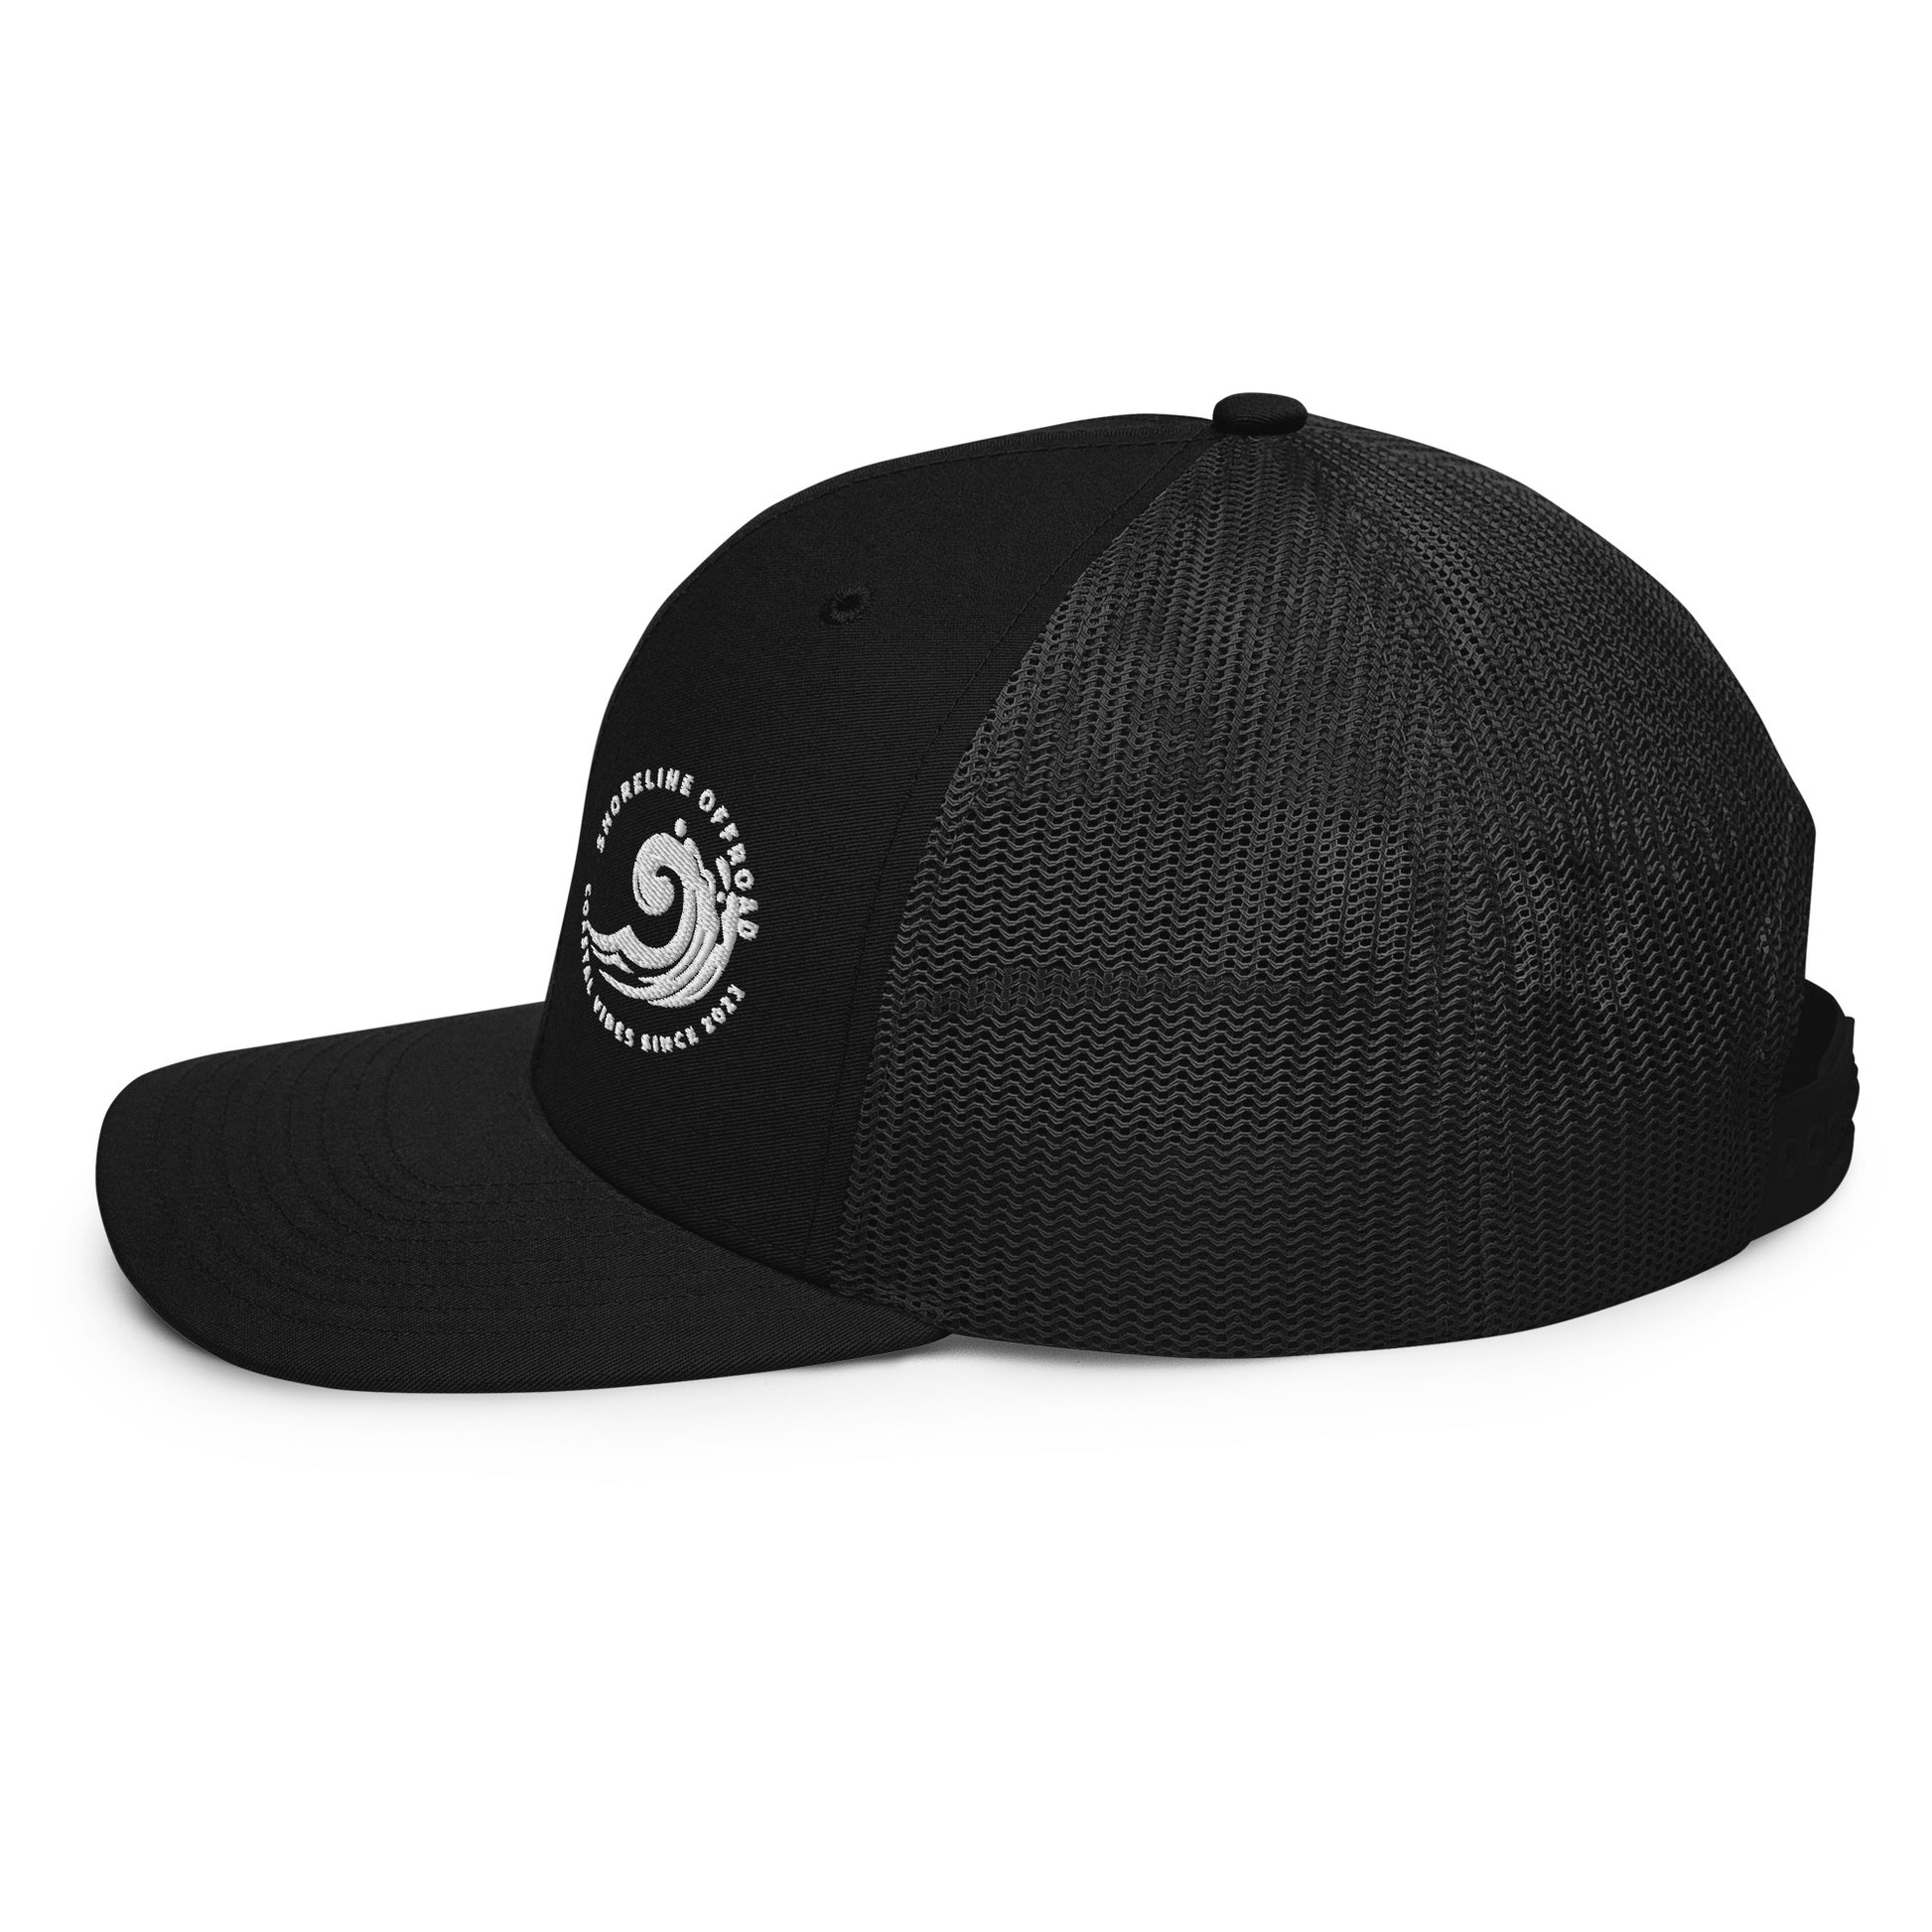 a black hat with a white logo on it